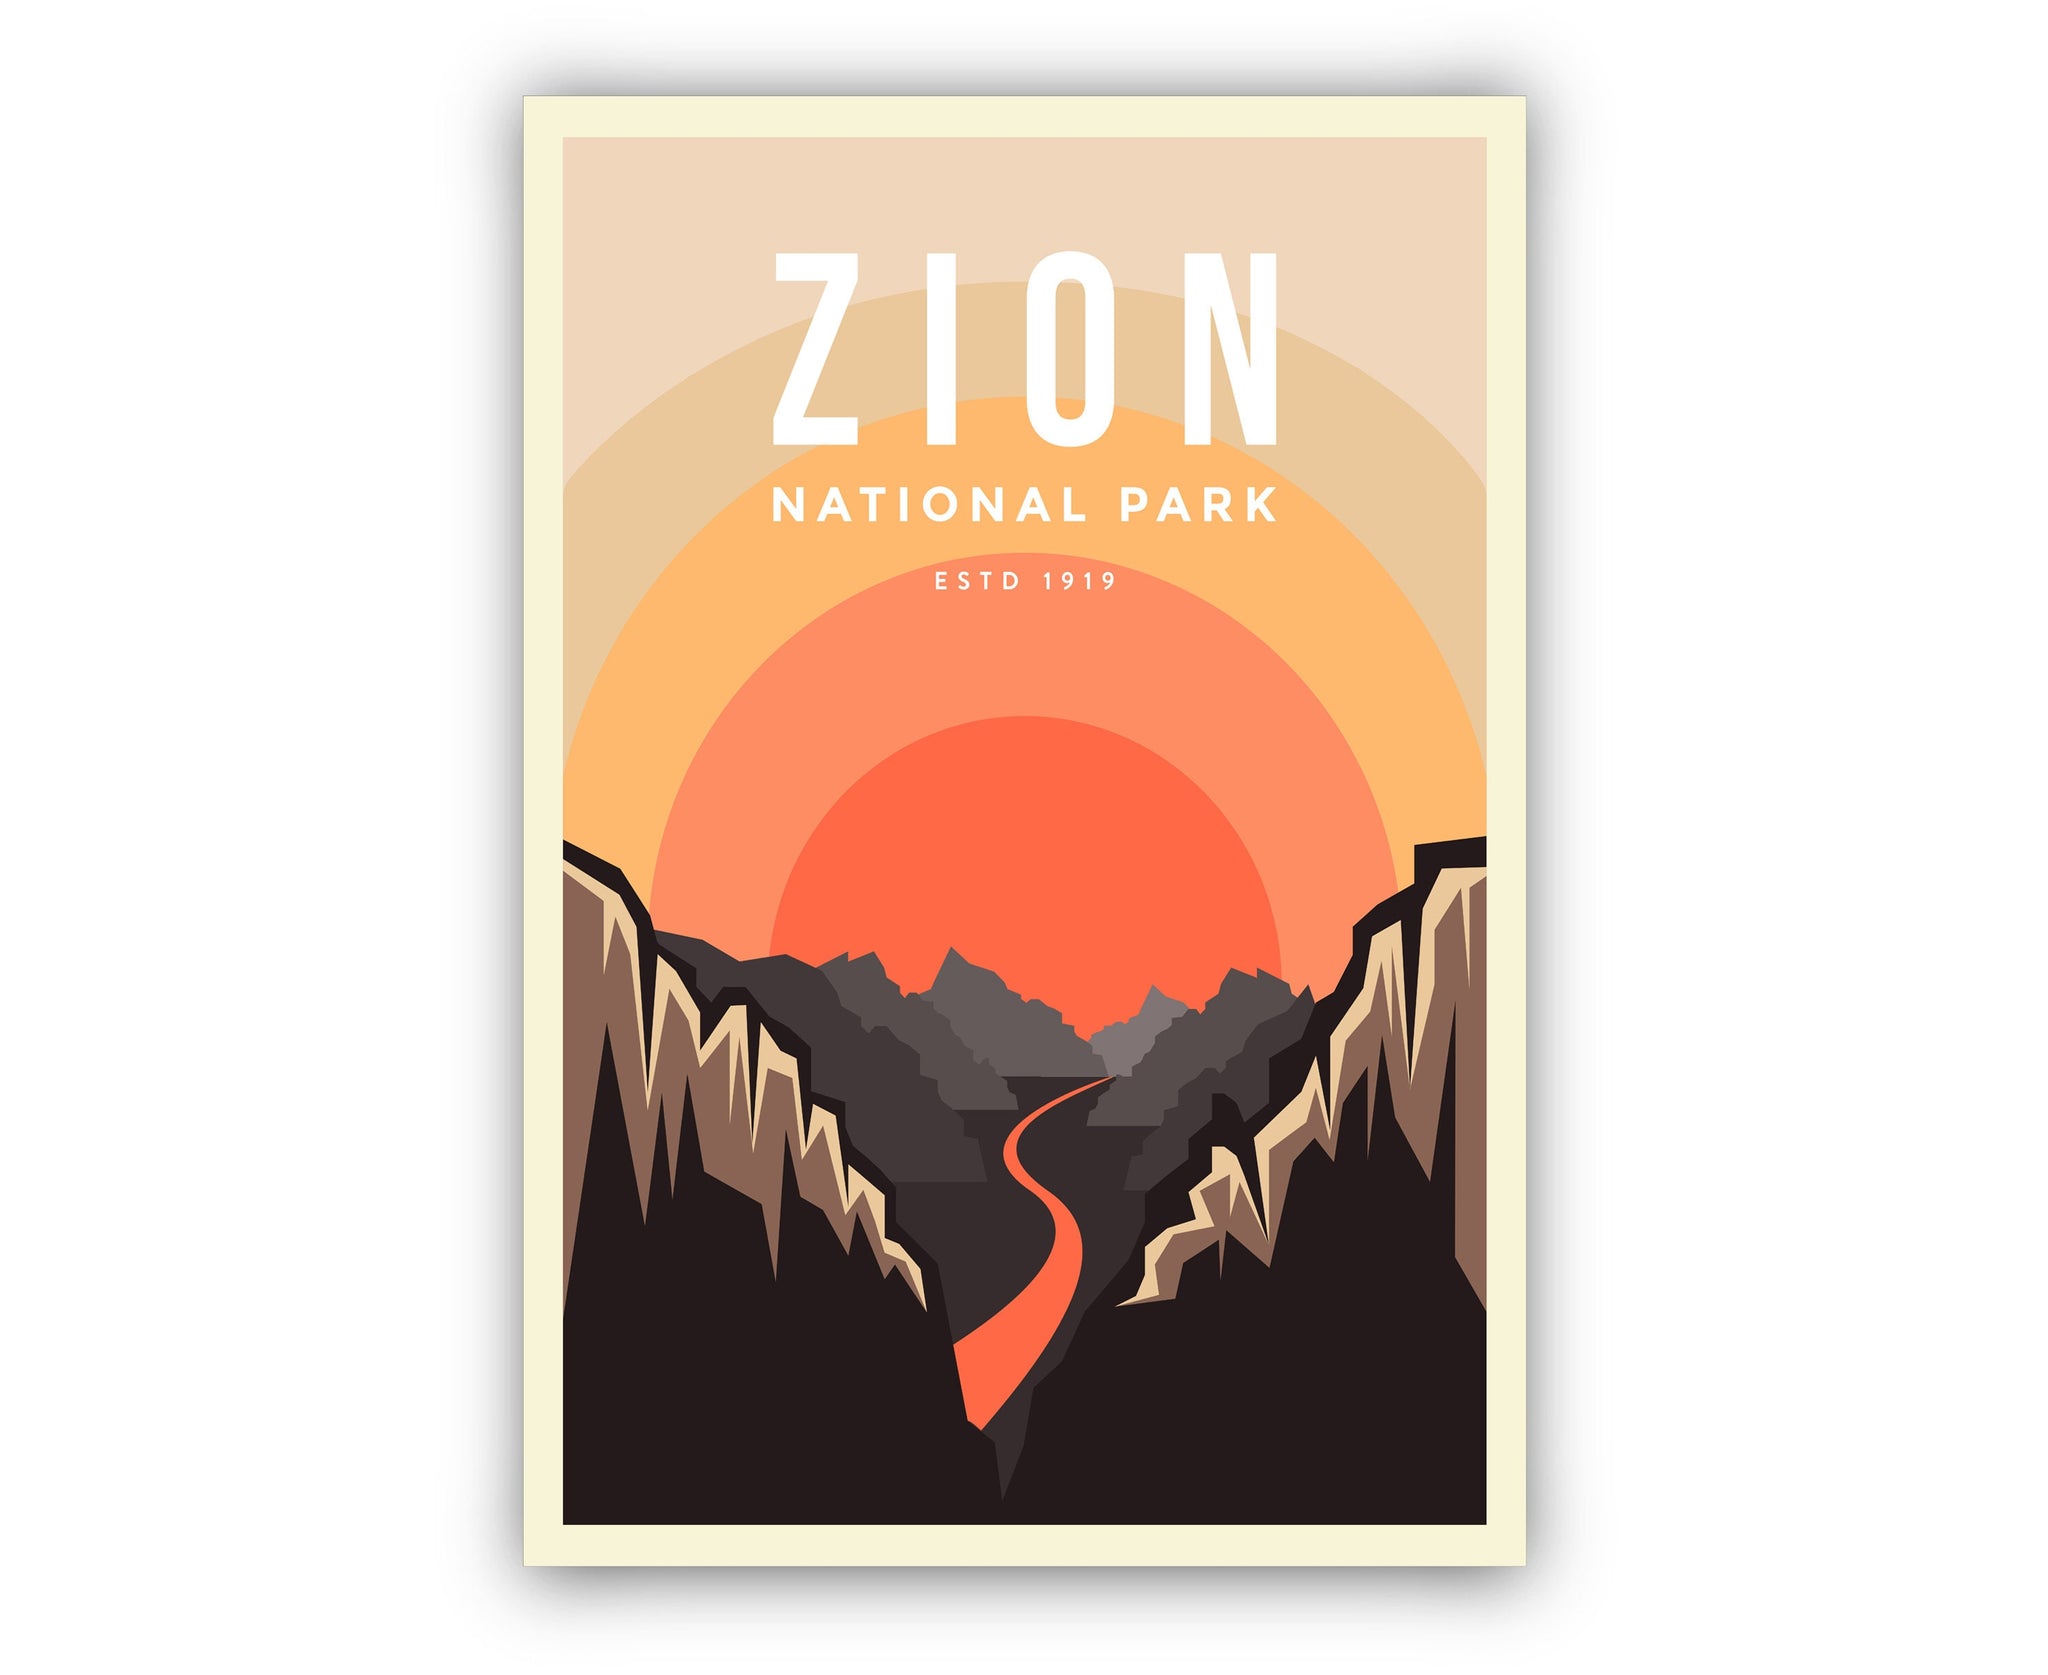 Zion National Park, Retro Travel Poster Print, Zion National park in Utah, Housewarming Gift, Office Wall Art, Utah Vintage Posters